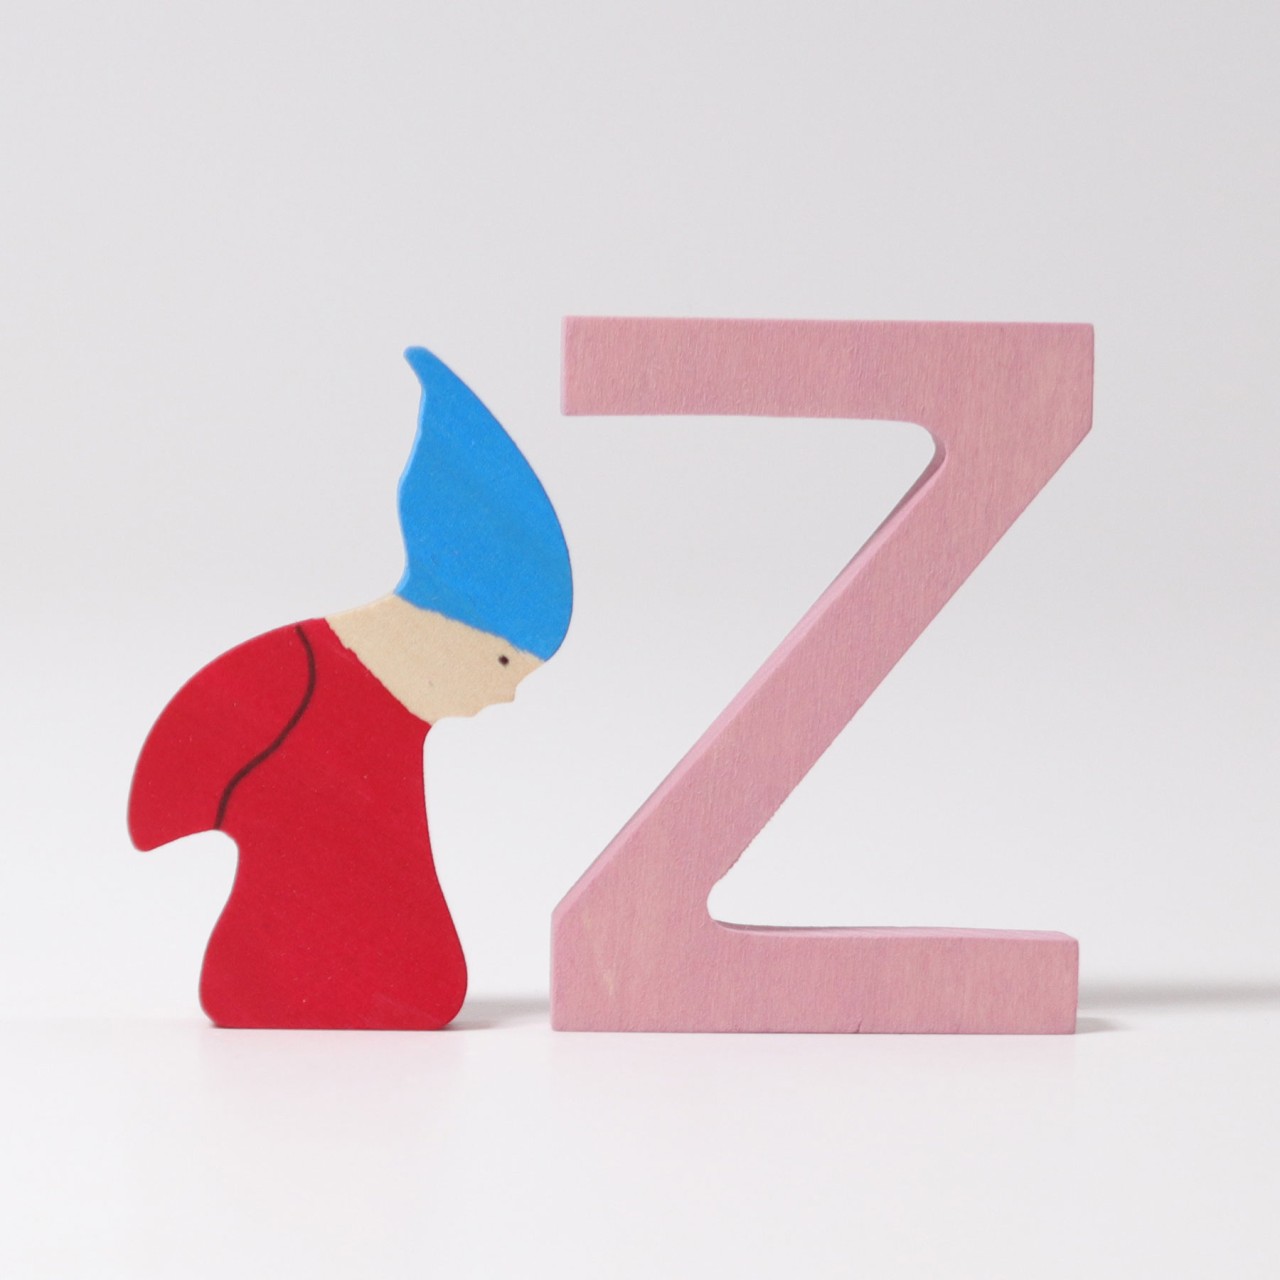 Grimms letters made of wood Z